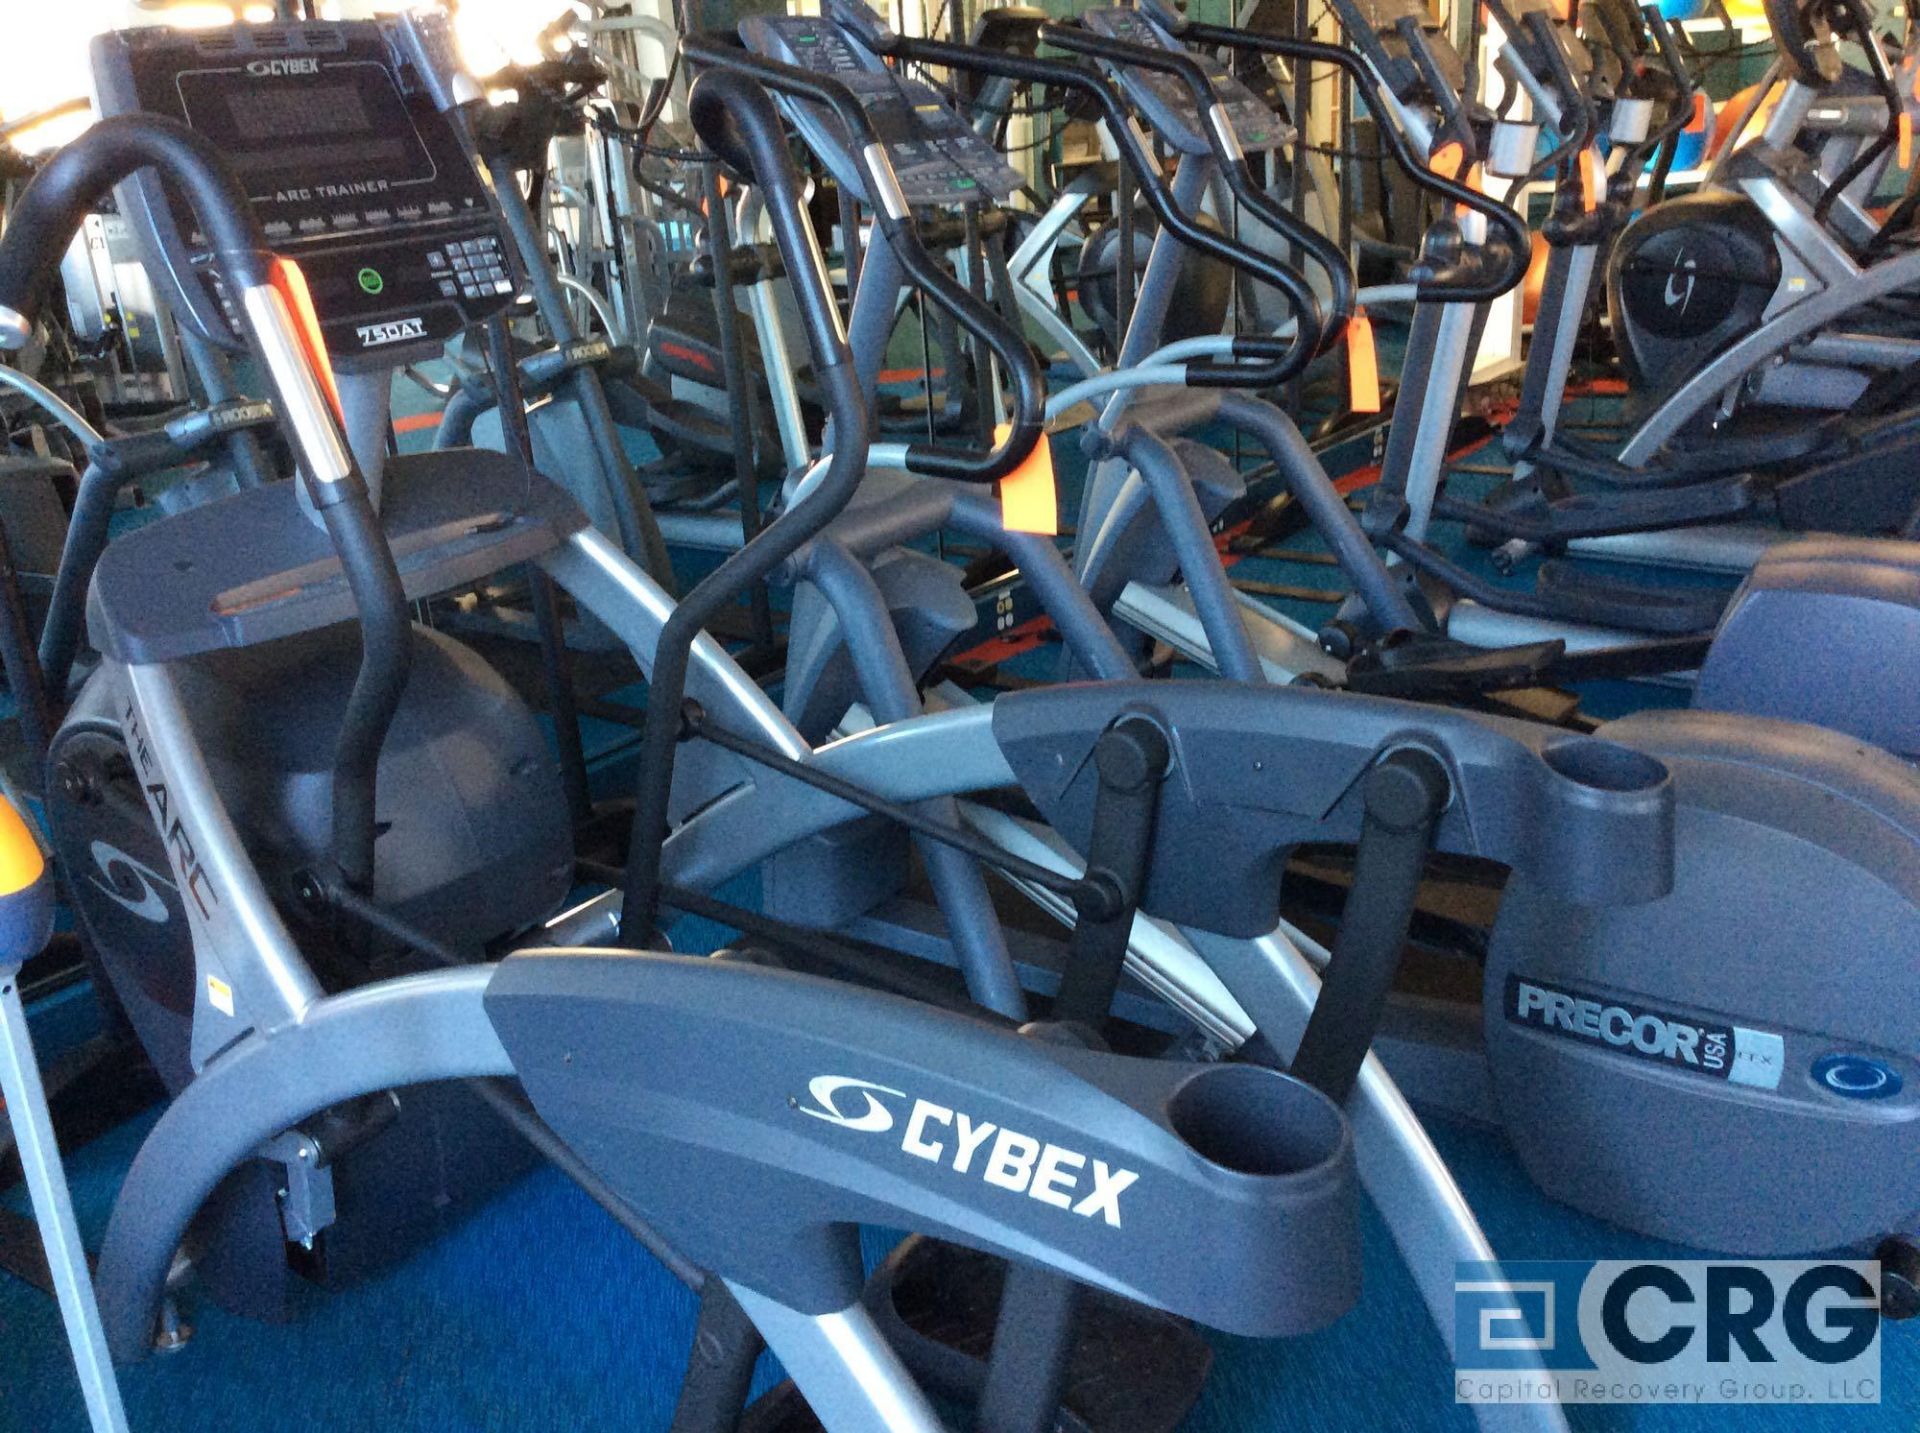 Cybex 750 AT Arc Trainer Machine, with Cardio Theater monitor - Image 2 of 3